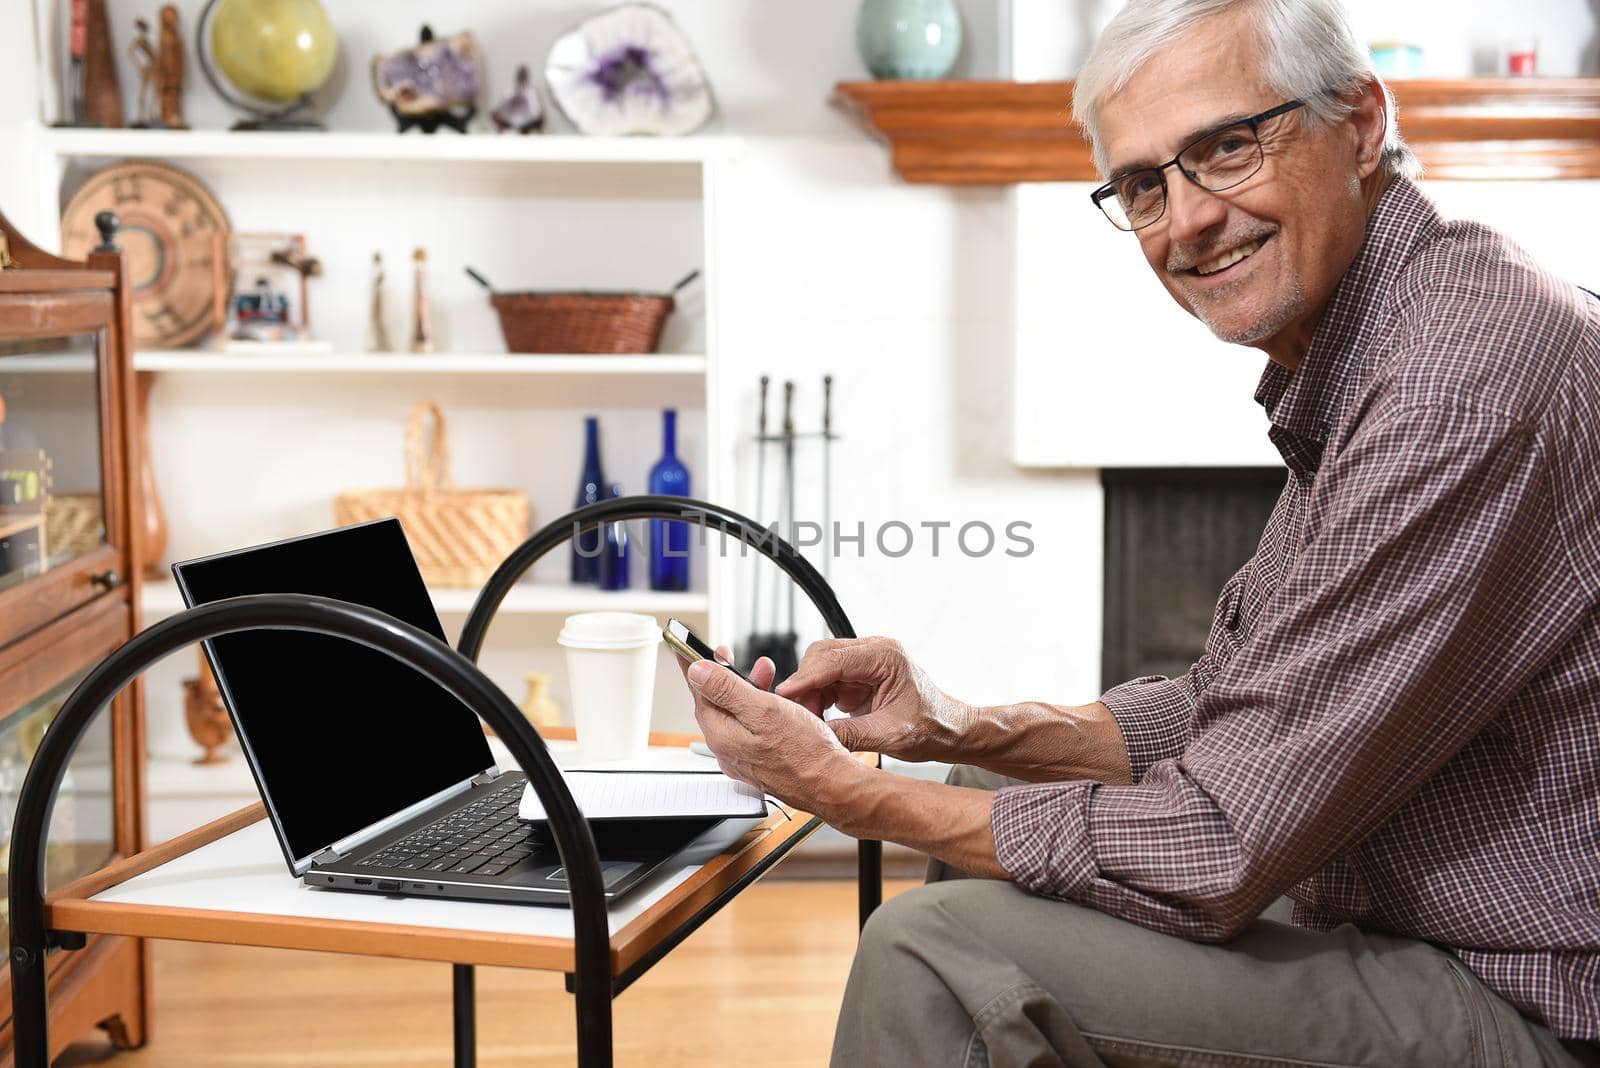 Mature man working from home with his laptop and cell phone. Man is looking at the samera ans smiling.